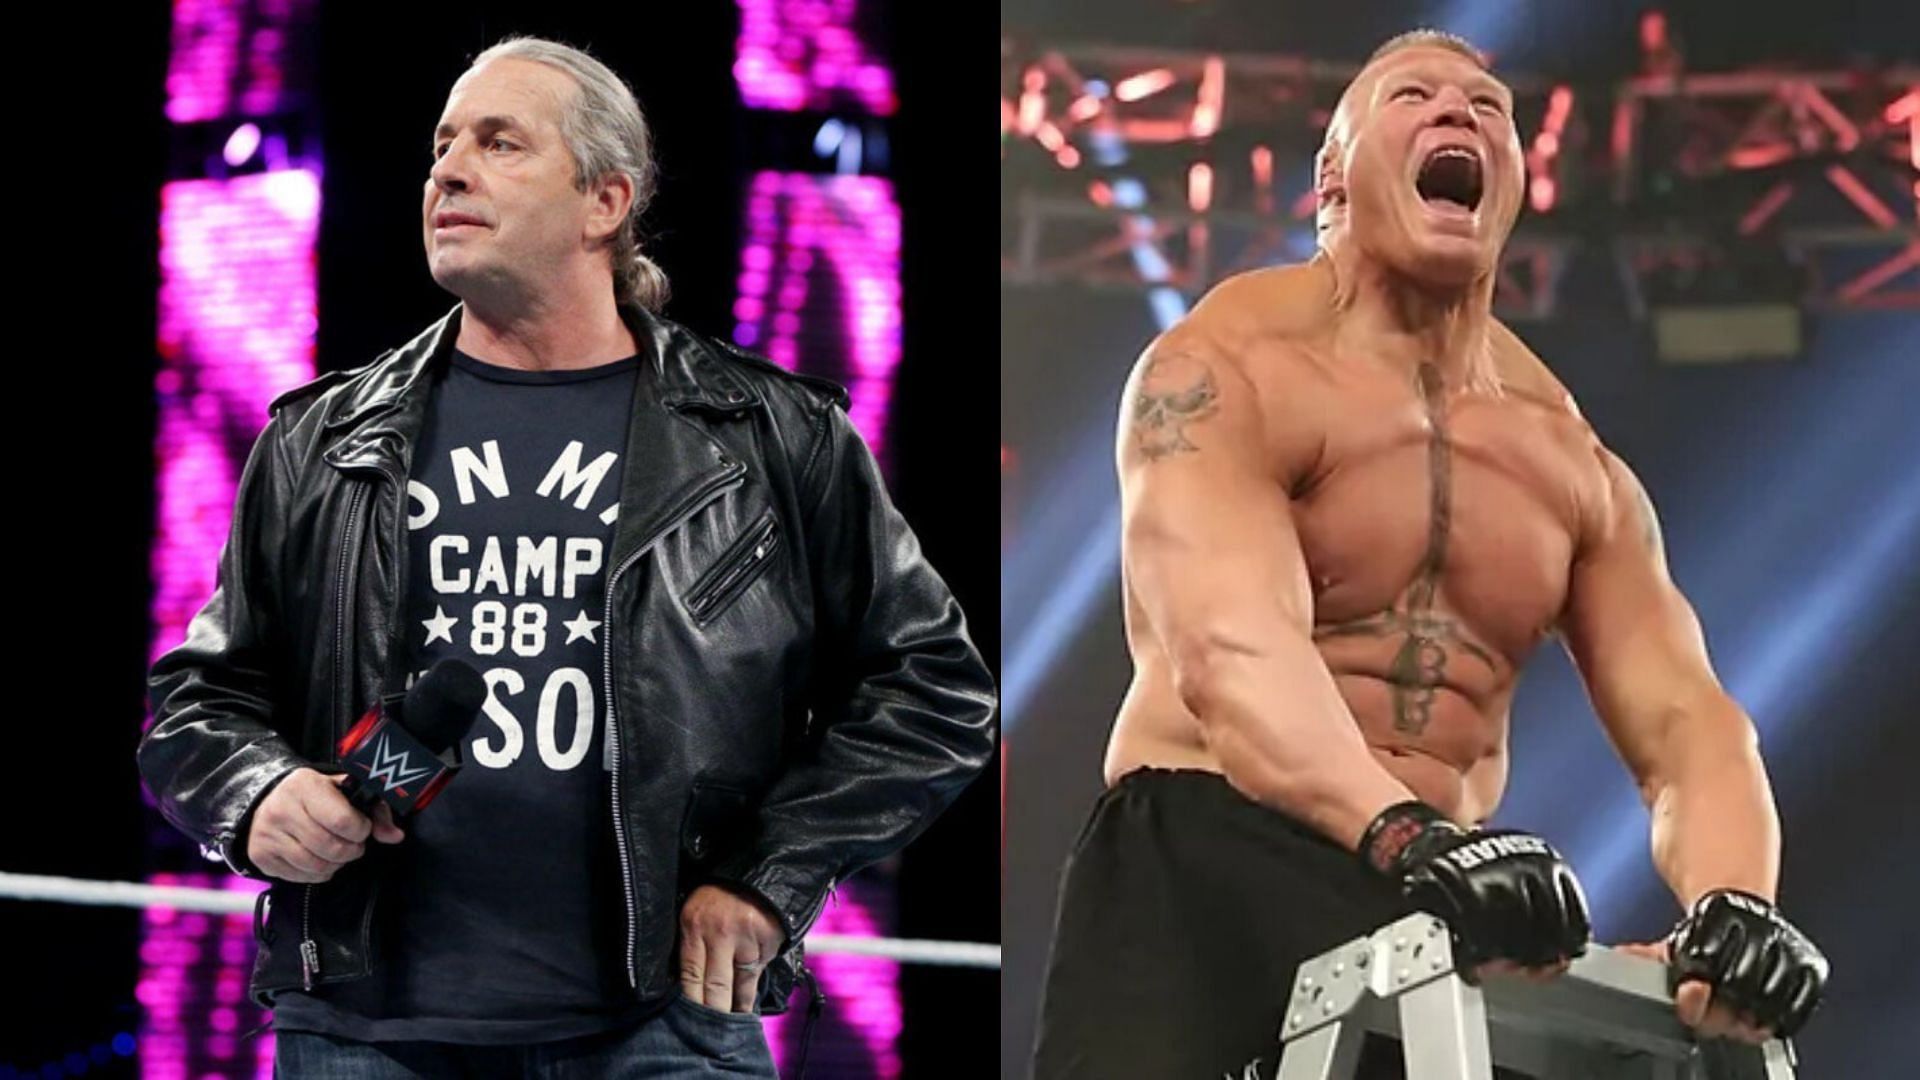 Bret Hart and Brock Lesnar had a rocky relationship with WWE in the past.